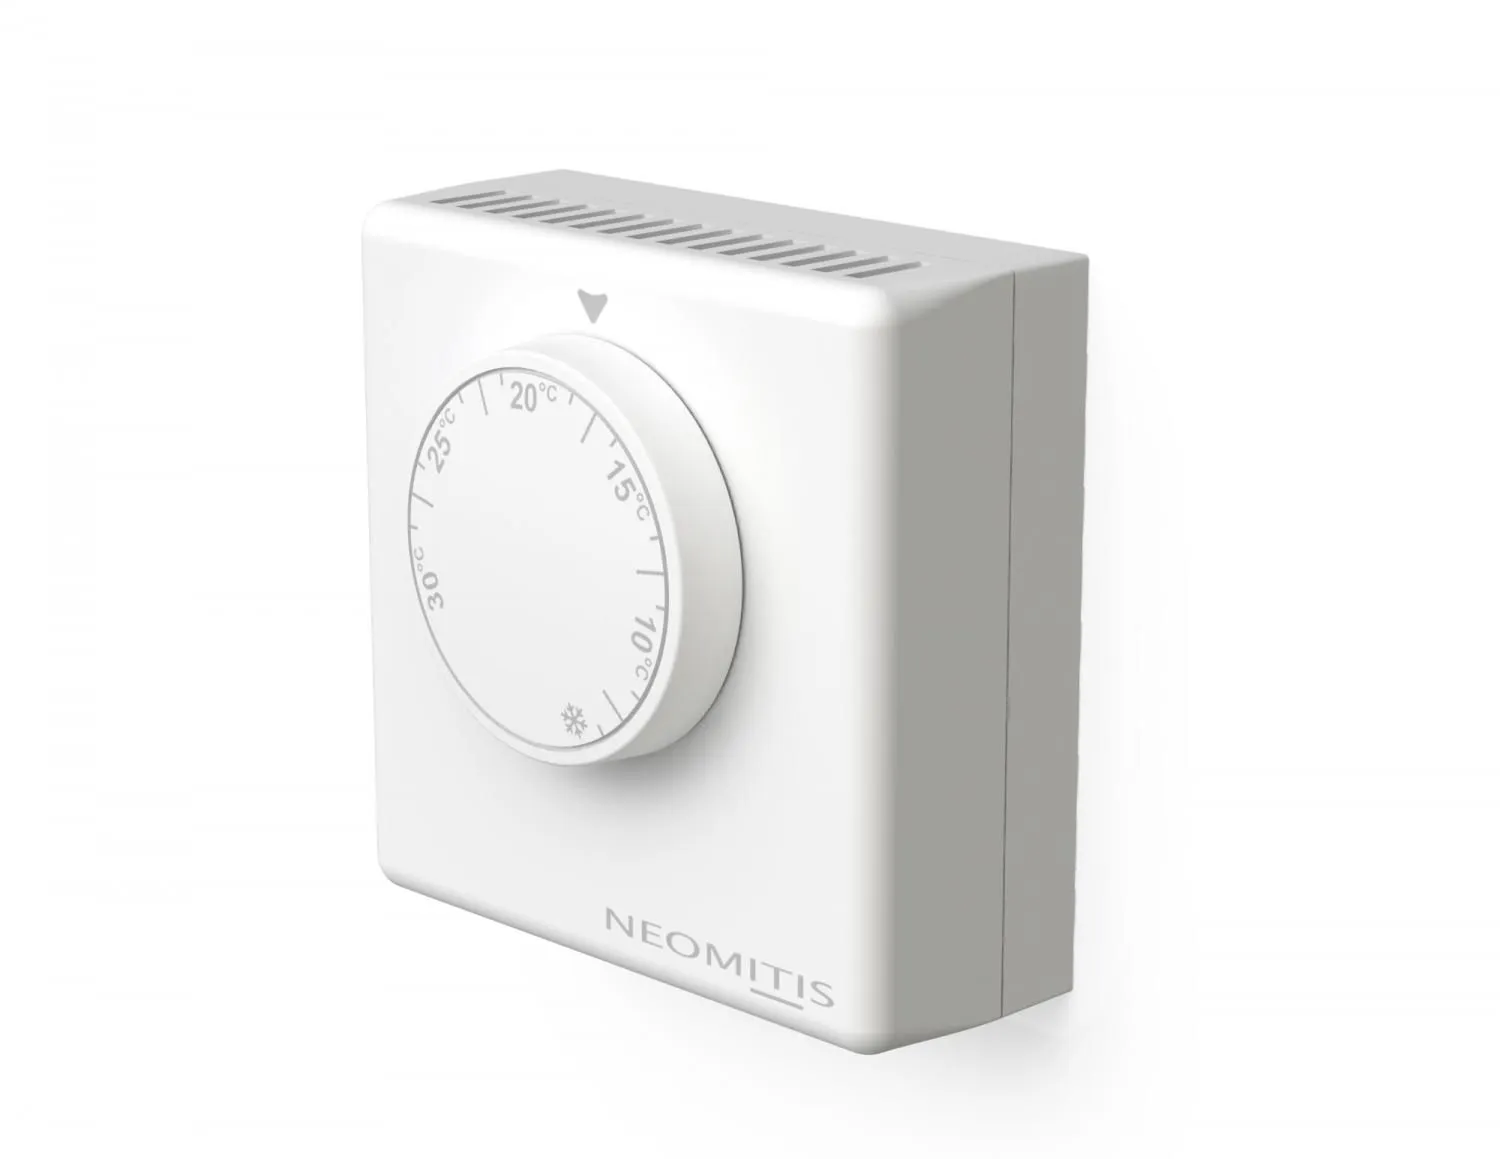 Neomitis RTM Wired Mechanical Room Thermostat